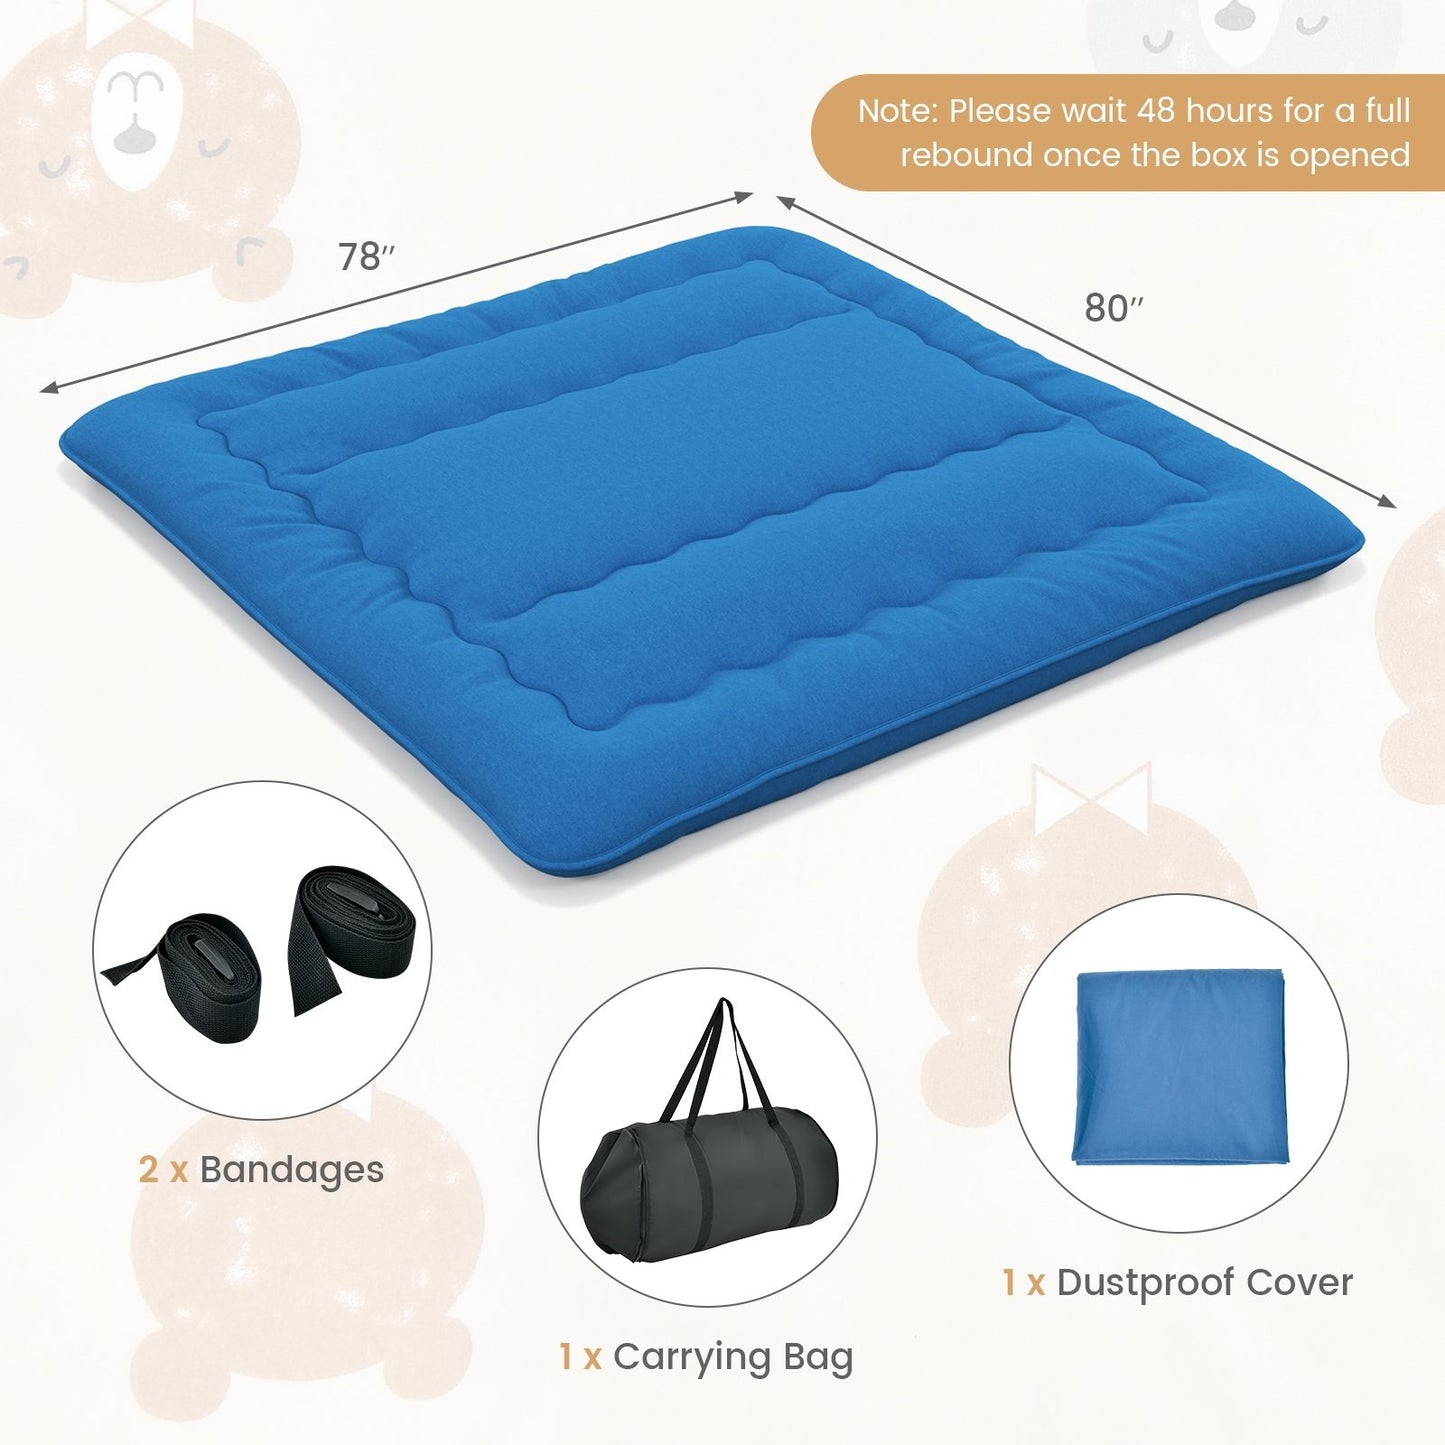 Foldable Futon Mattress with Washable Cover and Carry Bag for Camping Blue-King Size, Blue